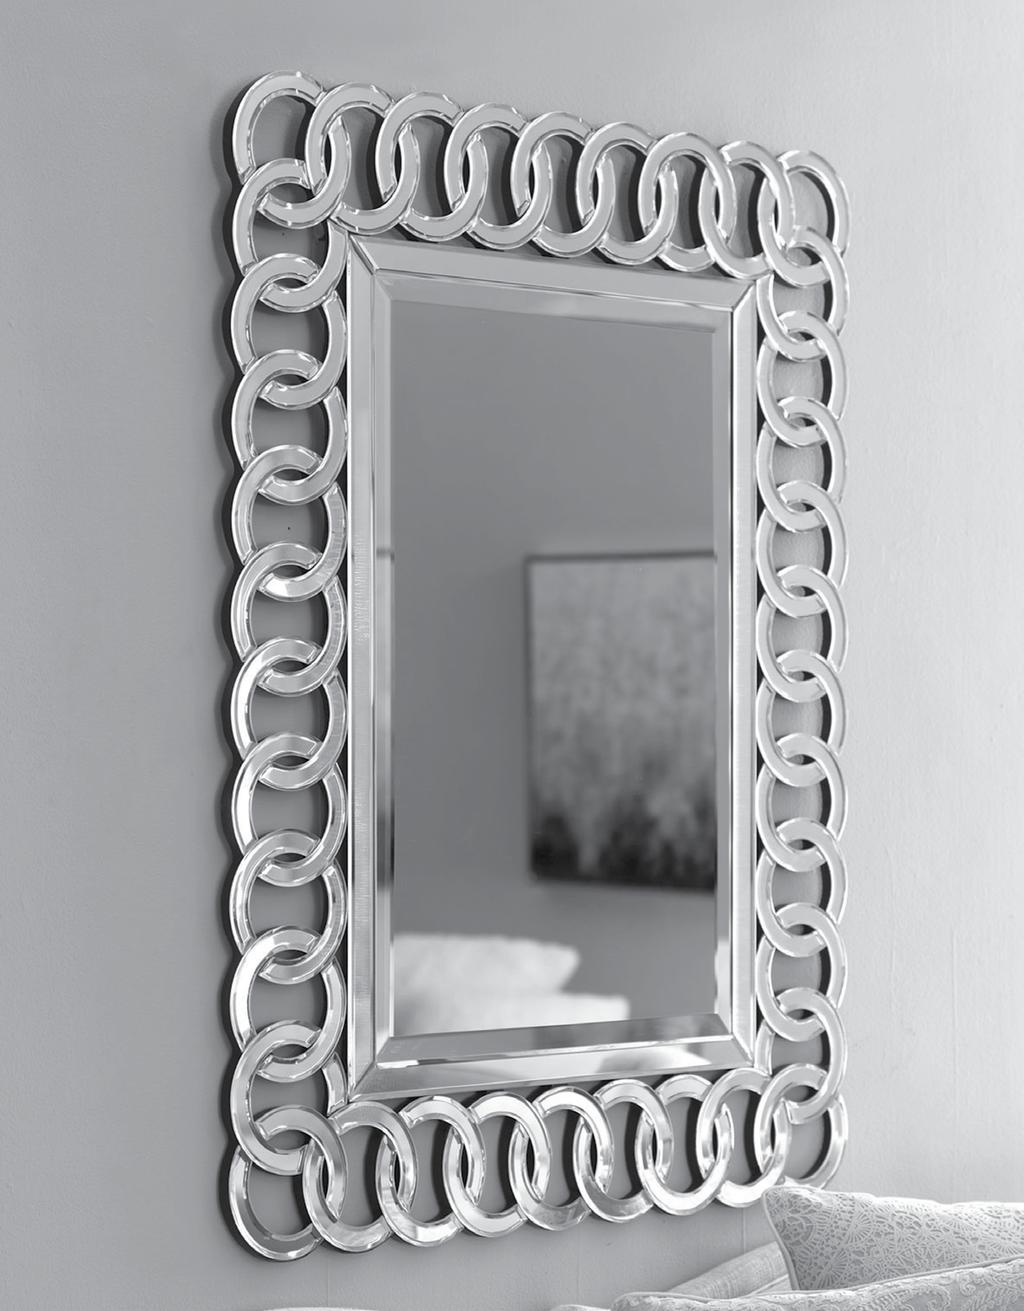 Our Decorative Mirrors